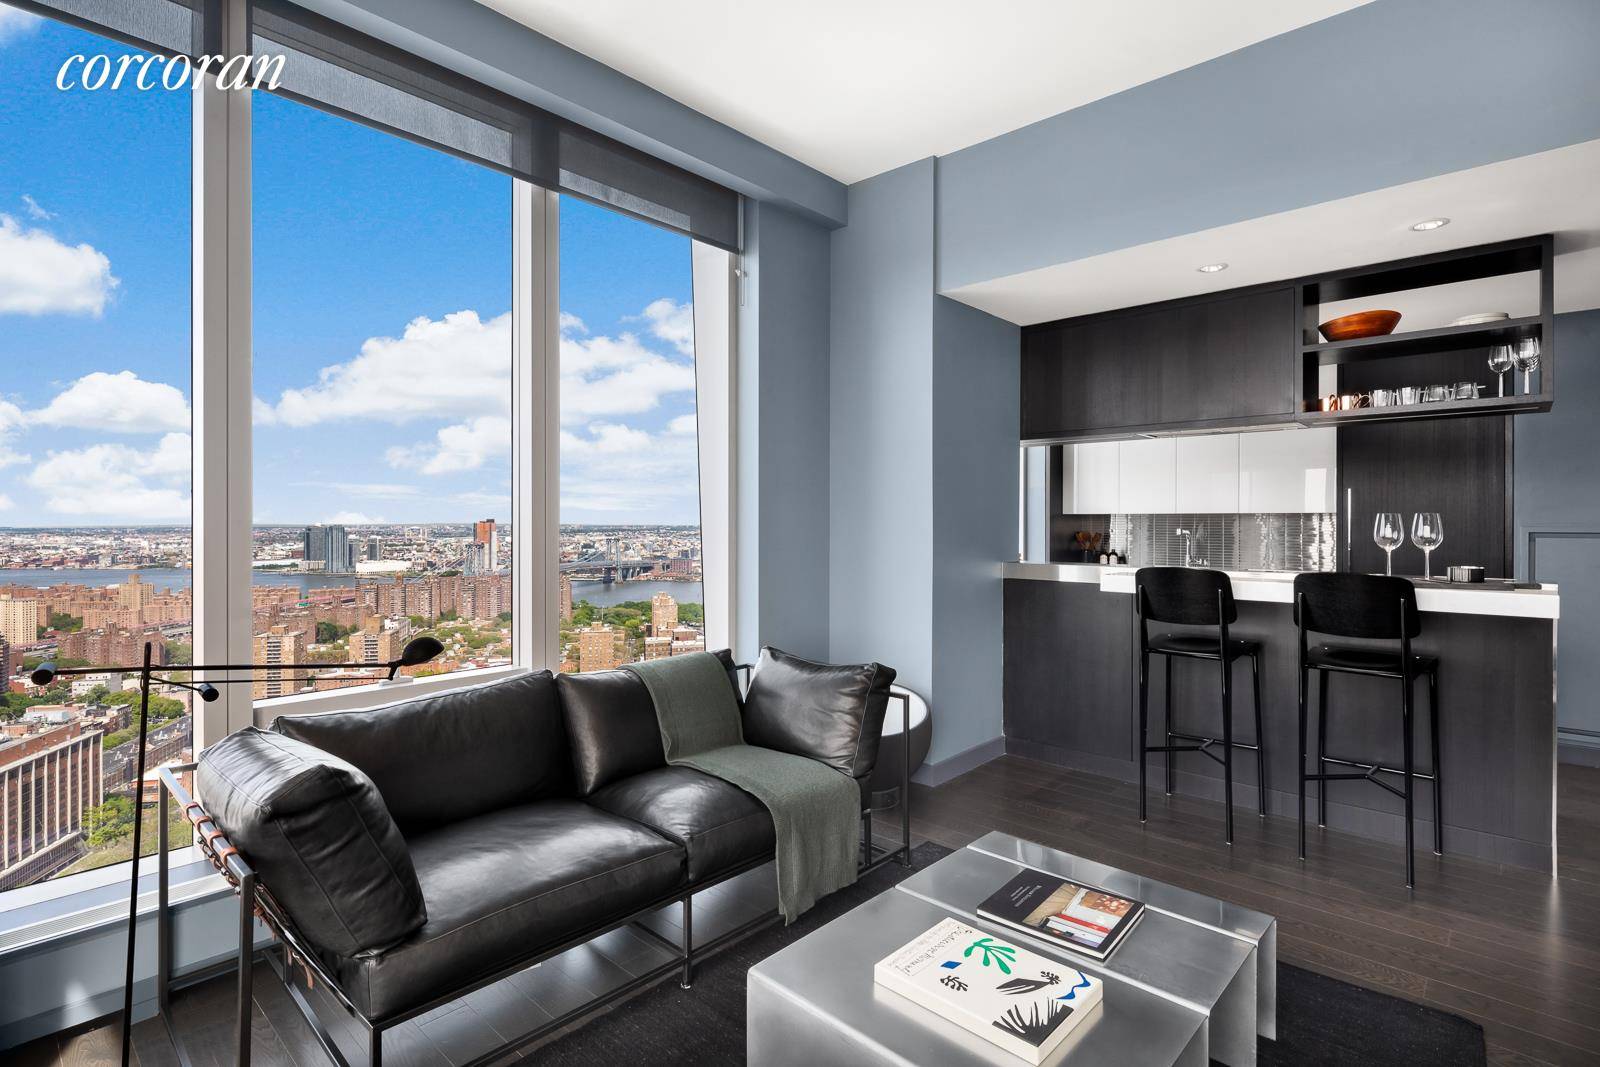 ONE MANHATTAN SQUARE OFFERS ONE OF THE LAST 20 YEAR TAX ABATEMENTS AVAILABLE IN NEW YORK CITY Residence 23L is a 1, 123 square foot two bedroom, two bathroom with ...